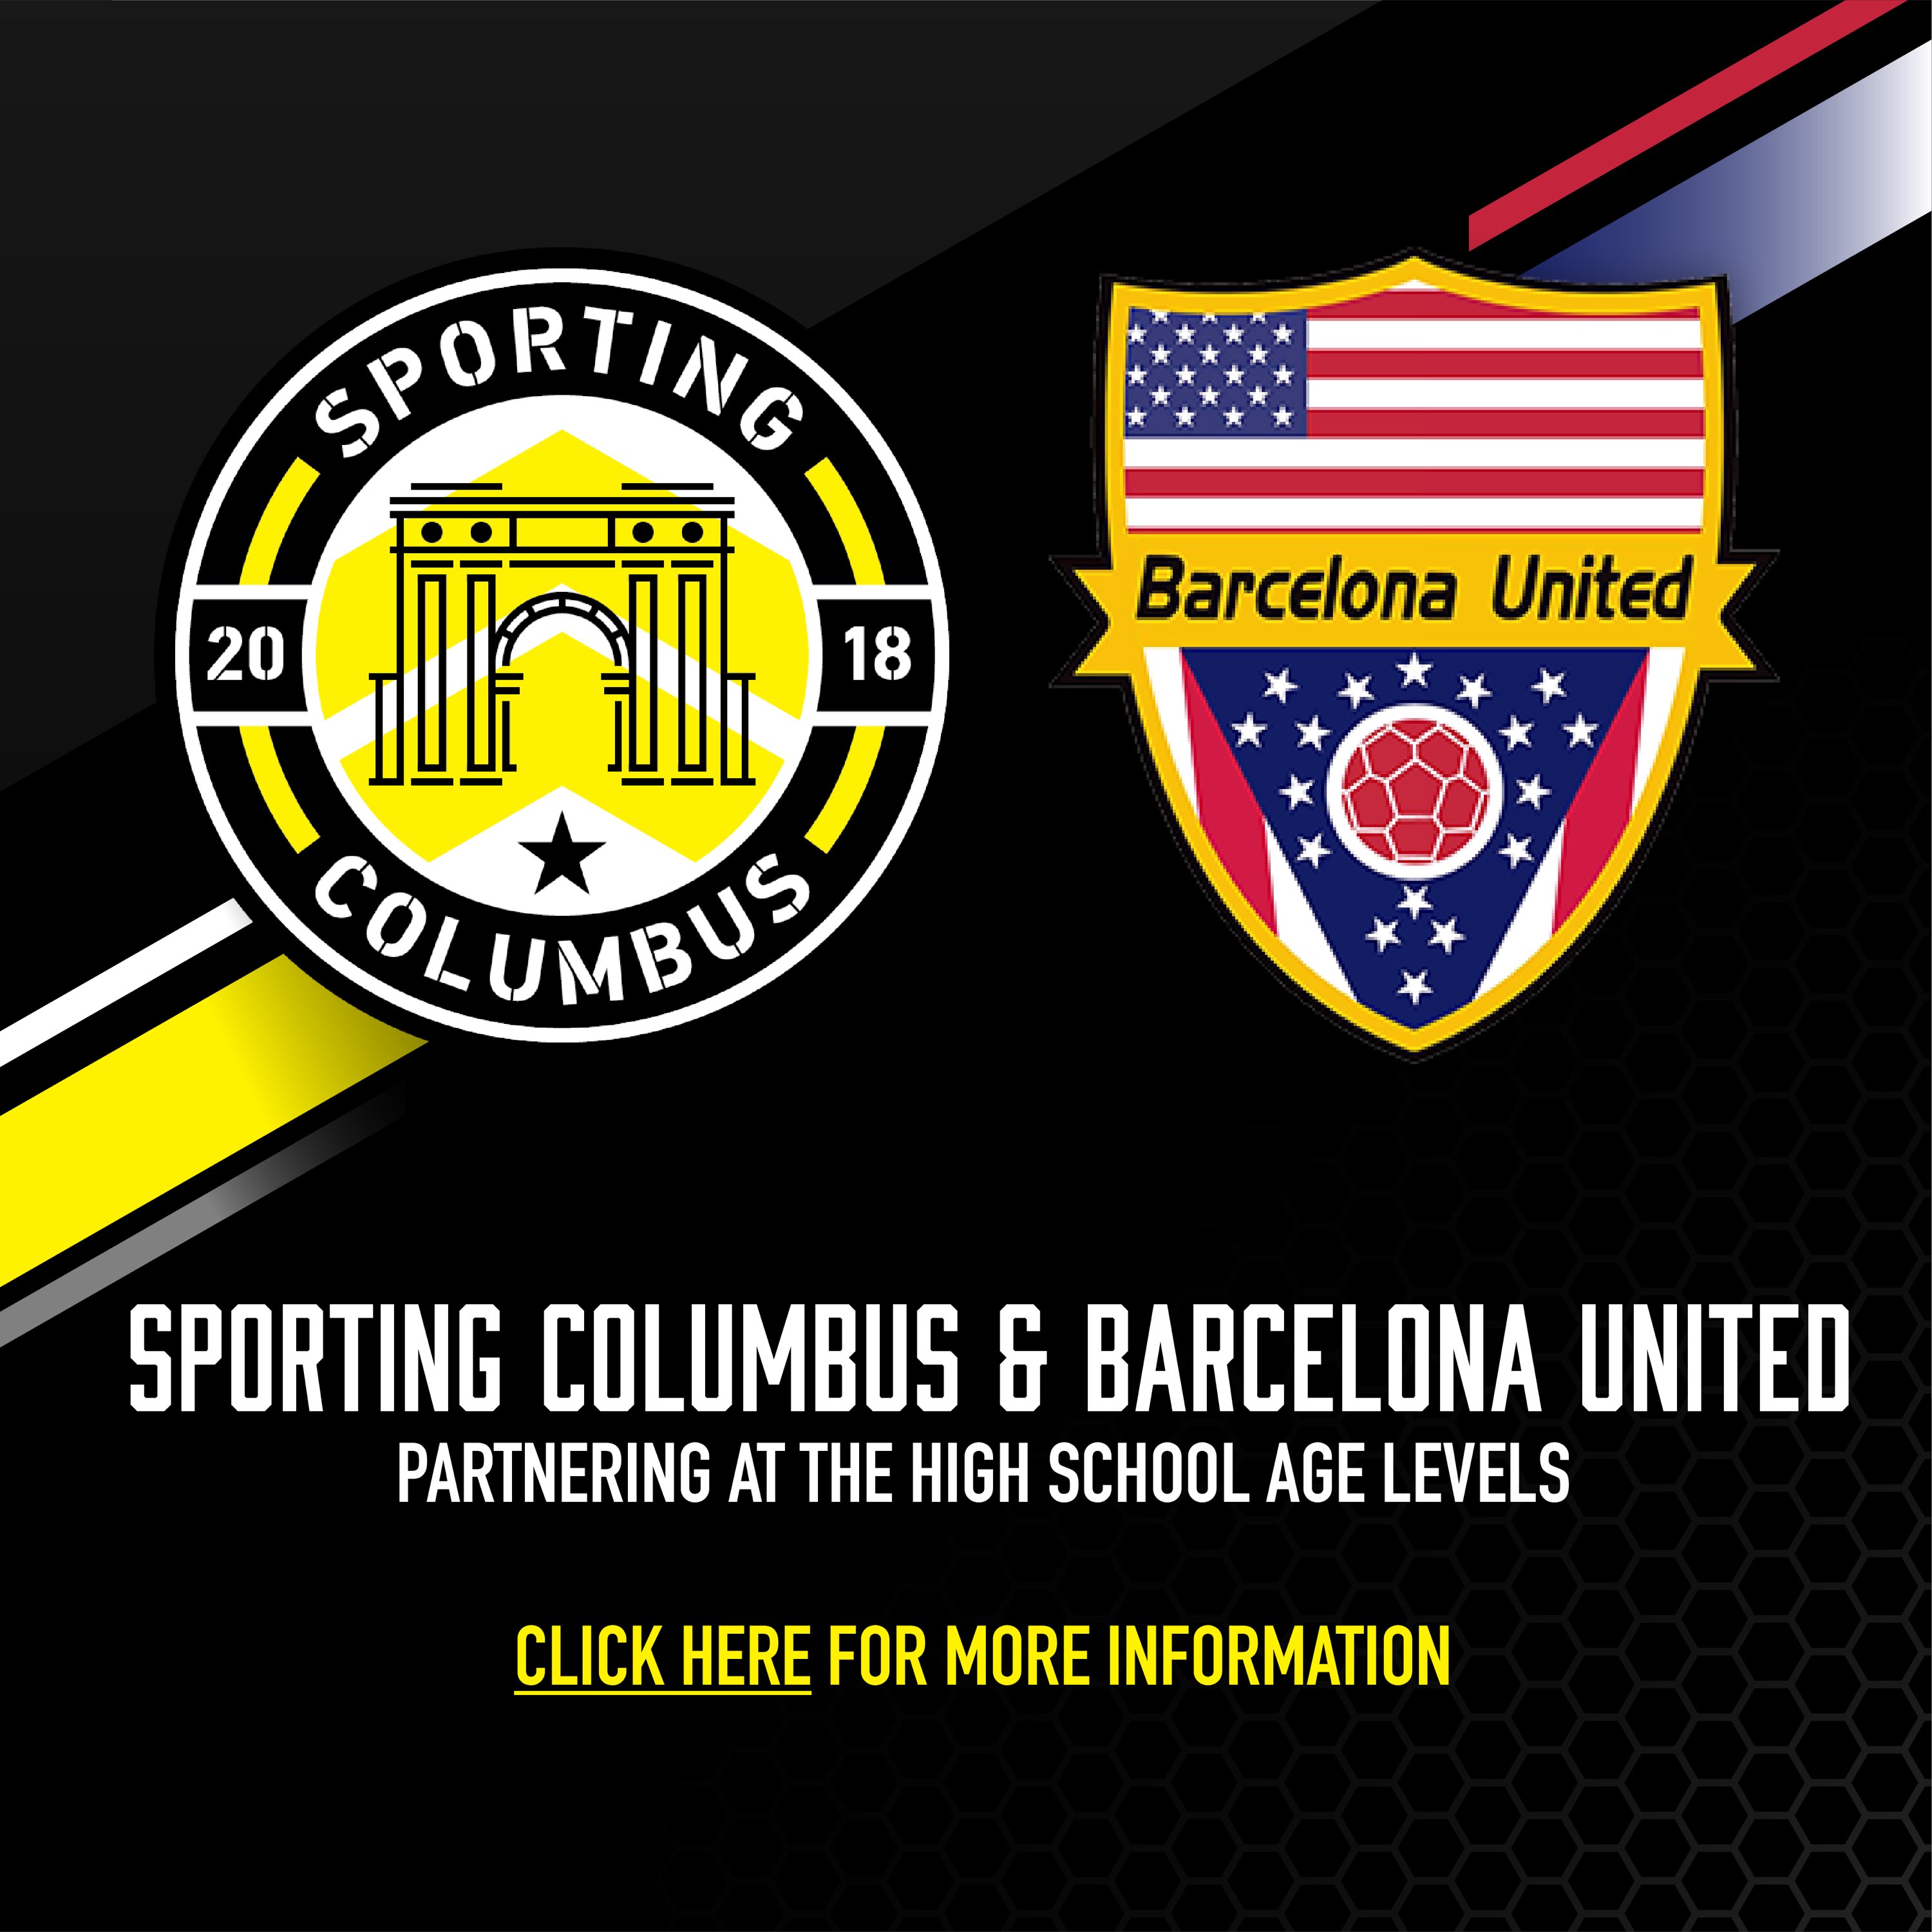 Barcelona United Partners with Sporting Columbus in High School Age Groups